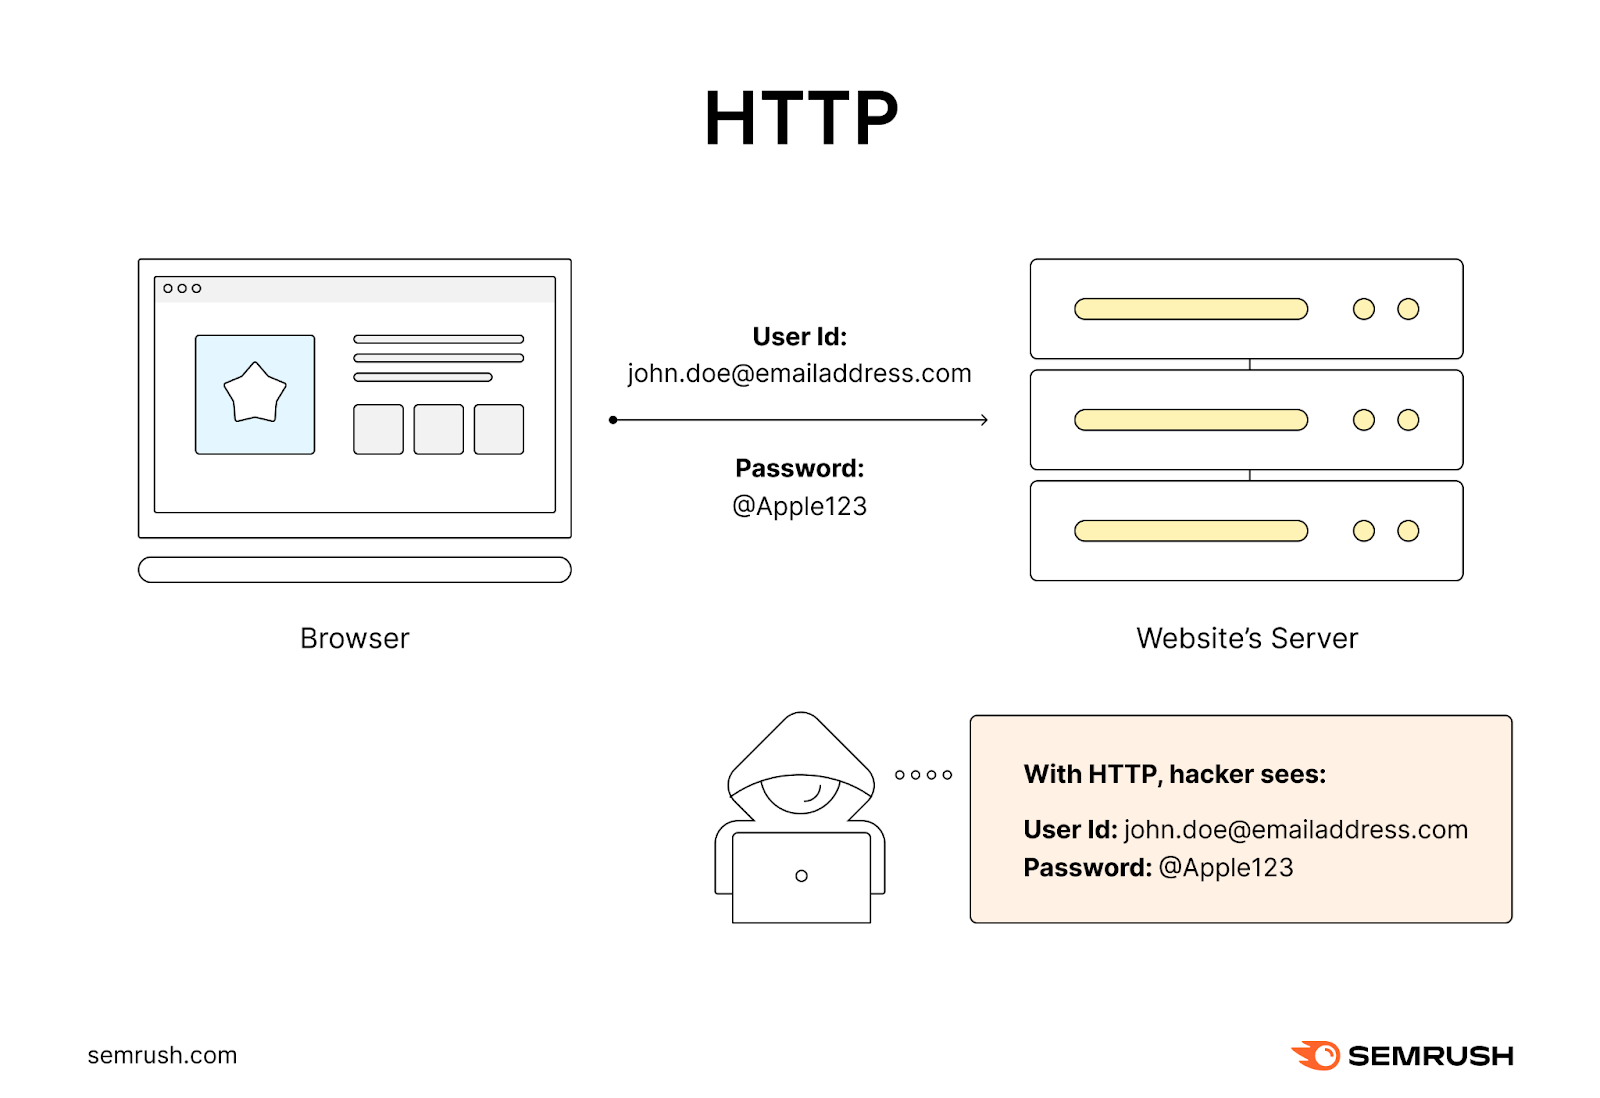 An illustration showing how HTTP works, with hackers' being able to intercept data